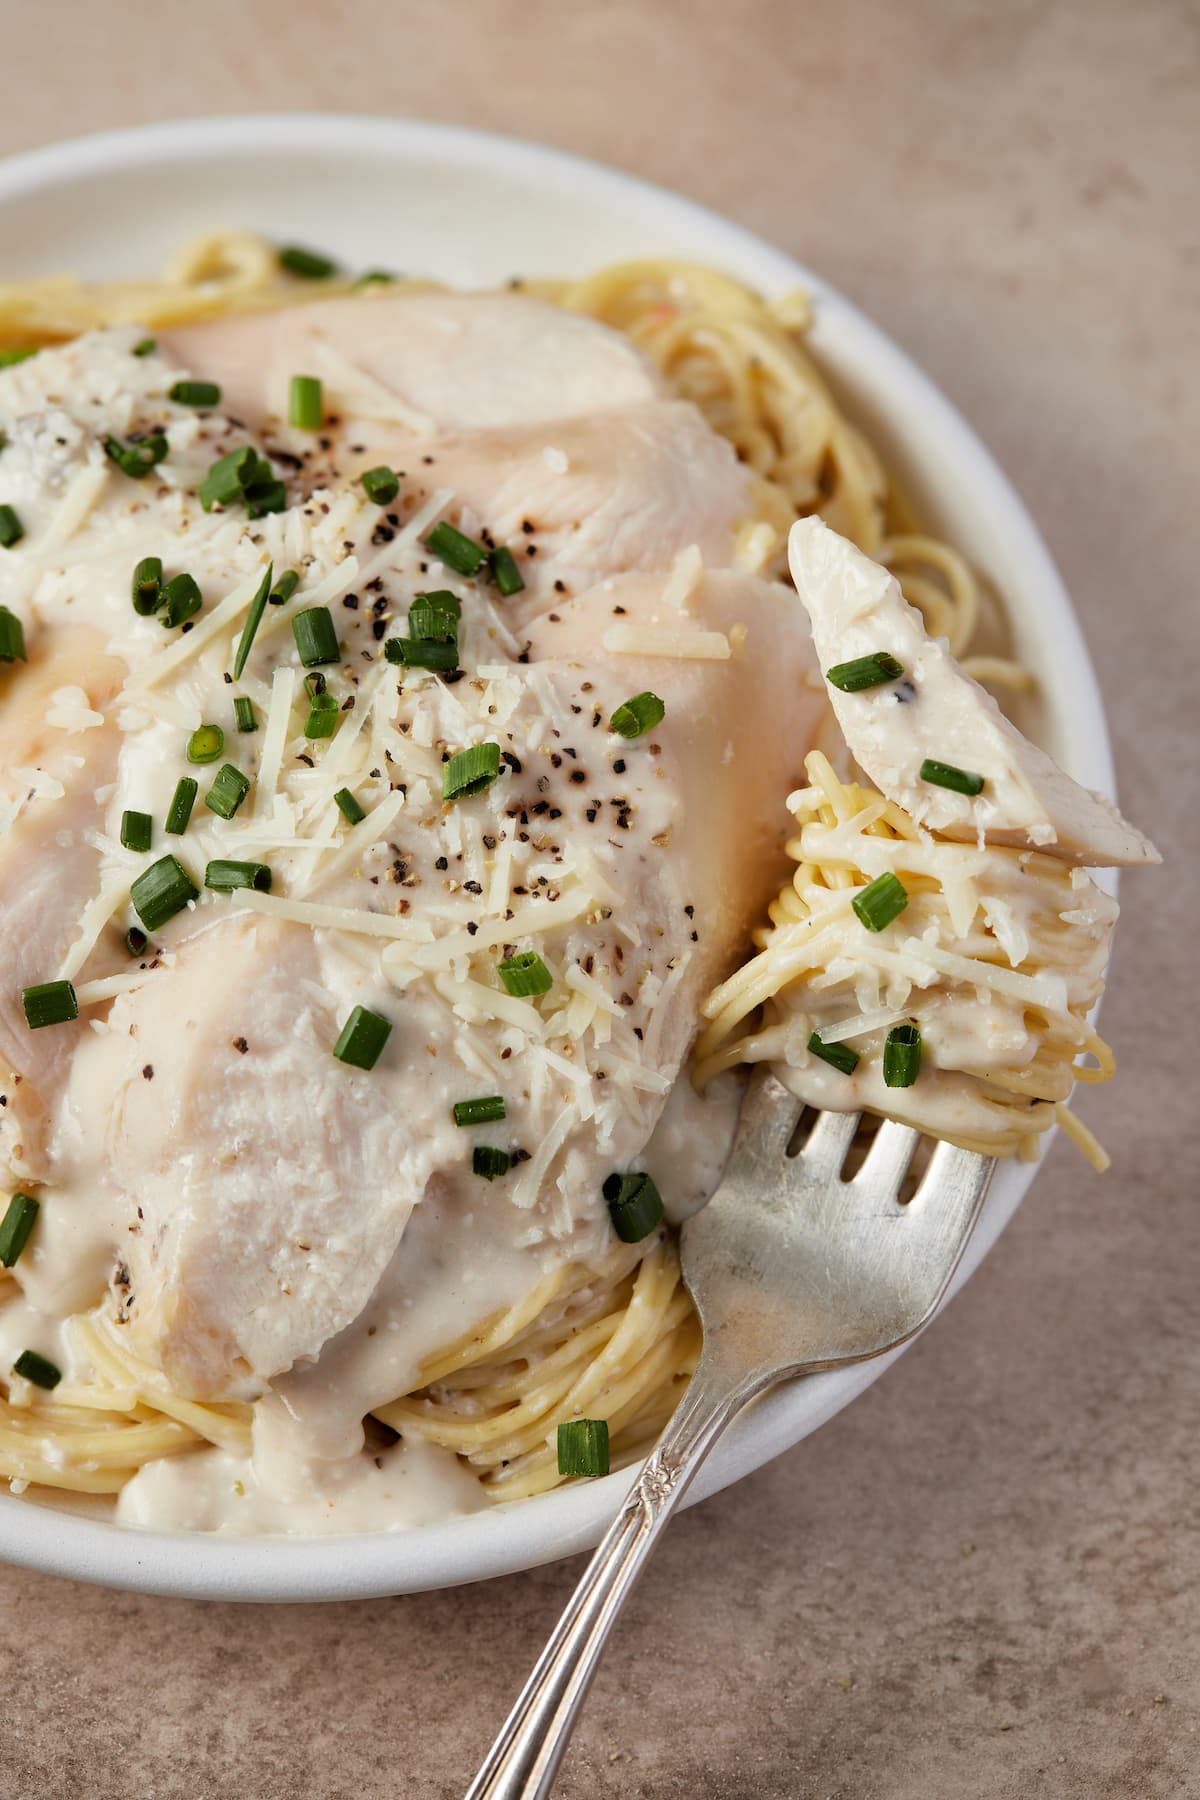 Creamy chicken pasta on a plate with a forkful.